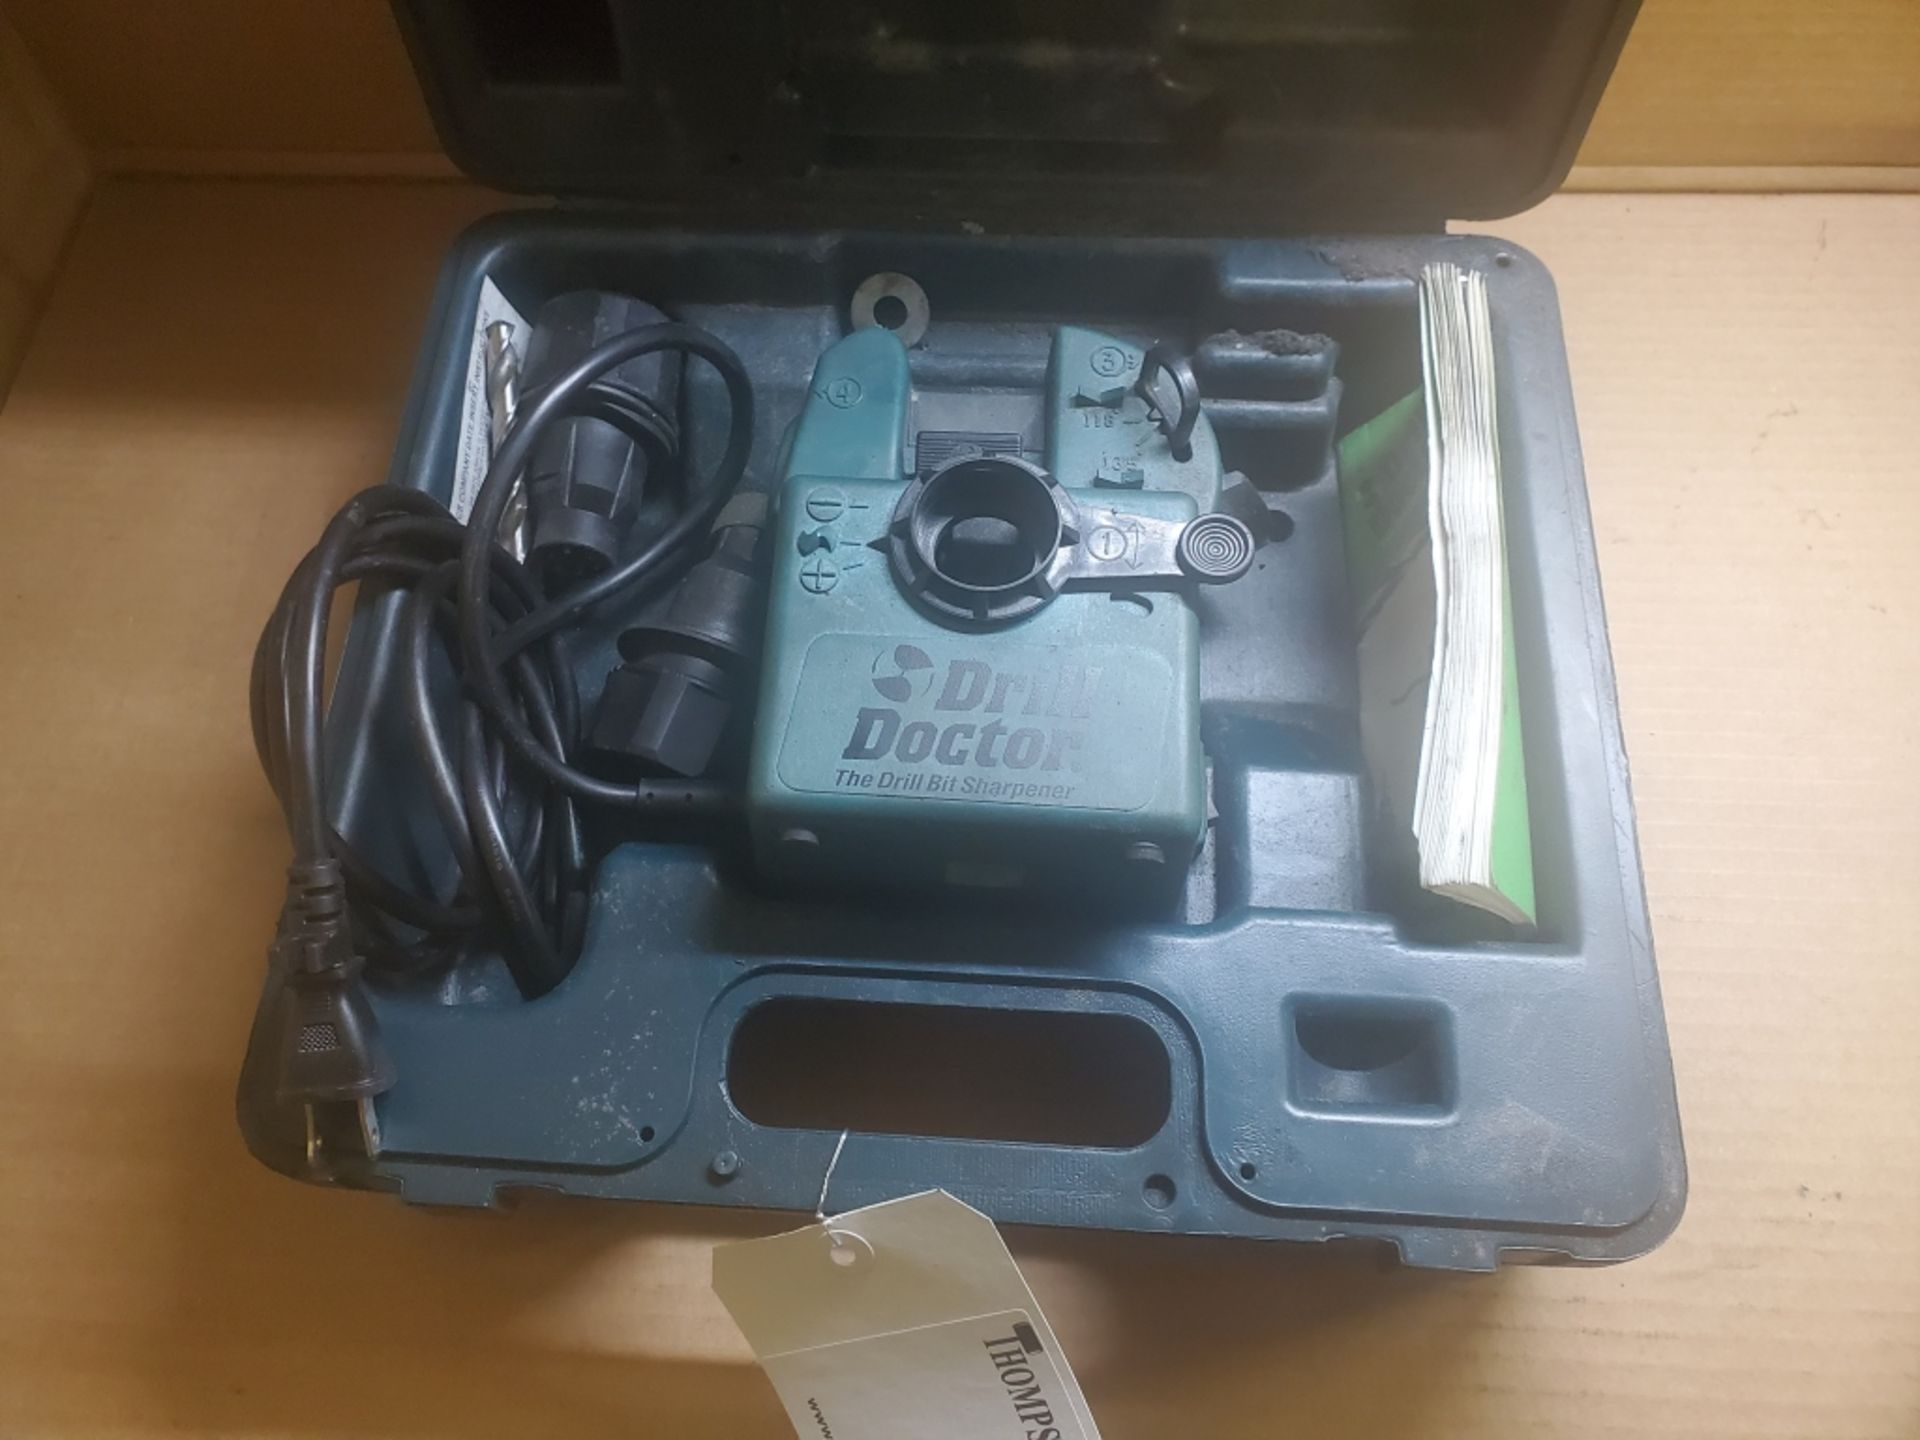 Drill Doctor Model 750 Drill Bit Sharpener With Case and Manual - Image 3 of 6